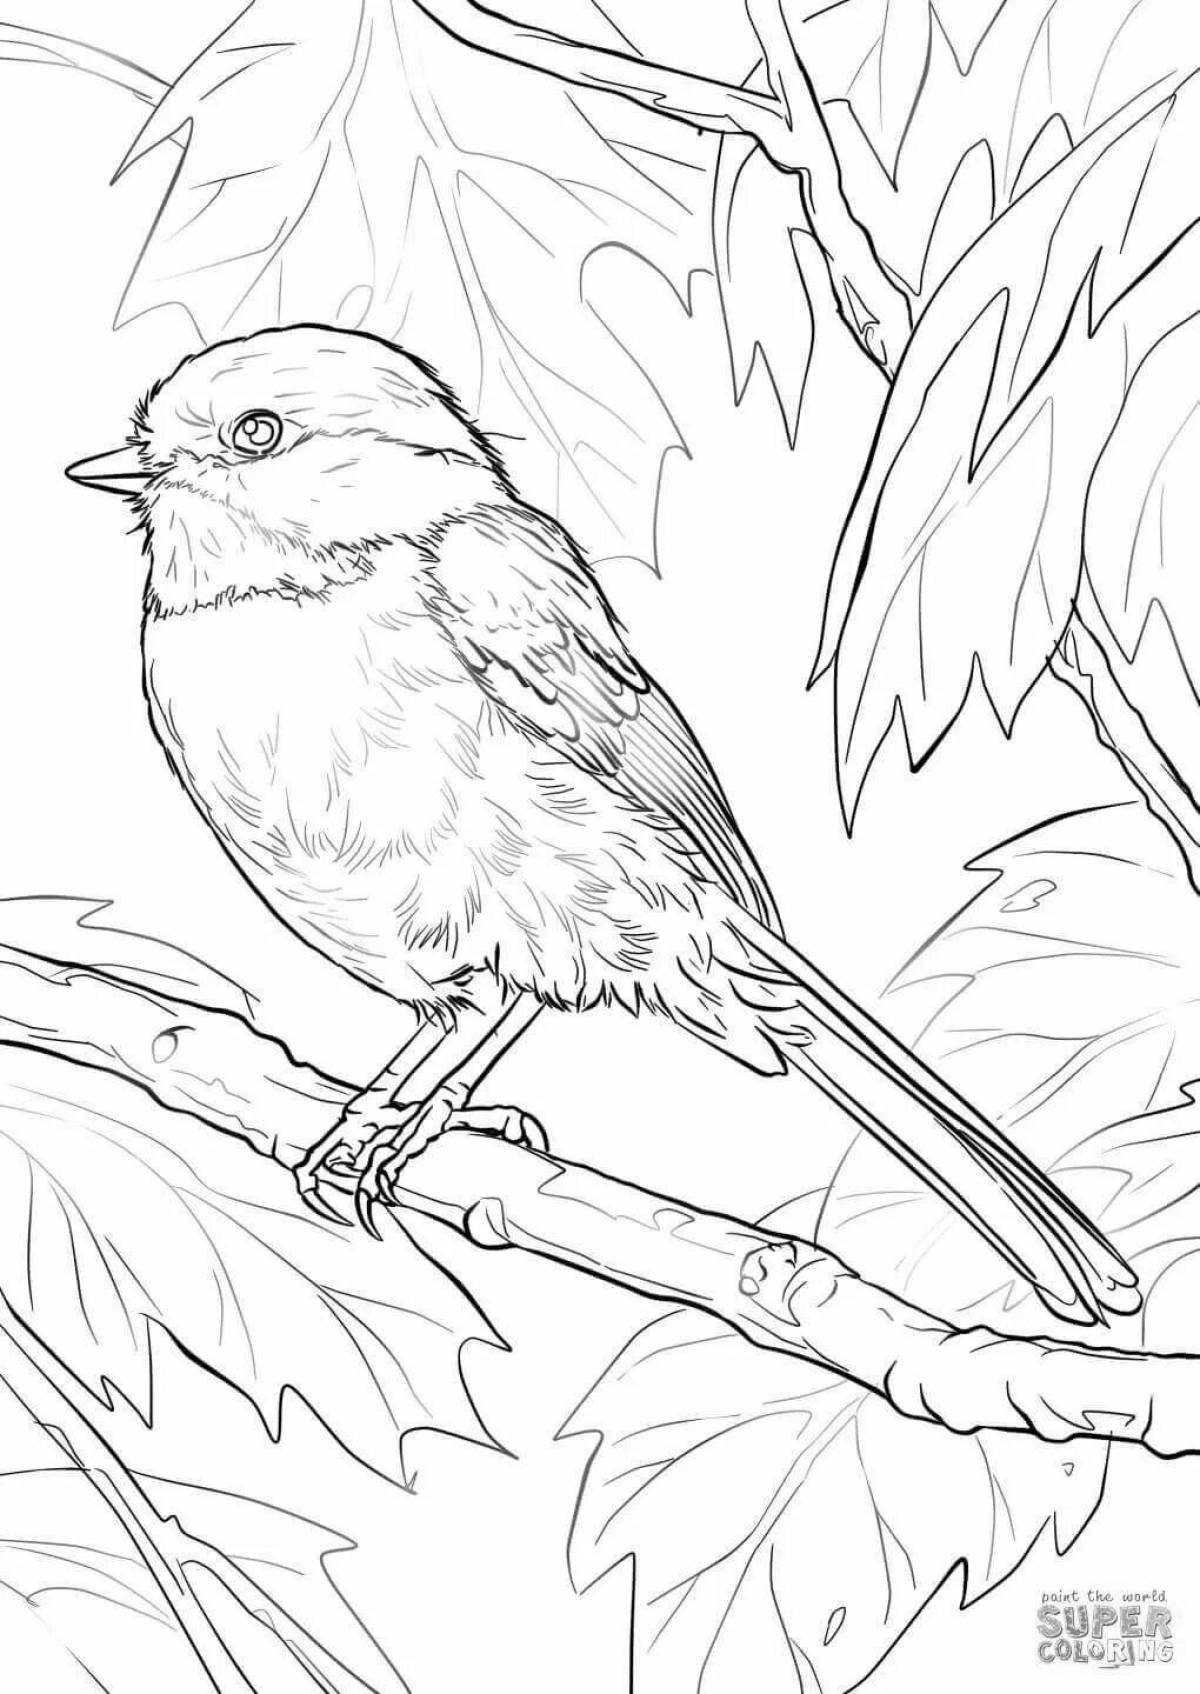 Delightful drawing of a titmouse